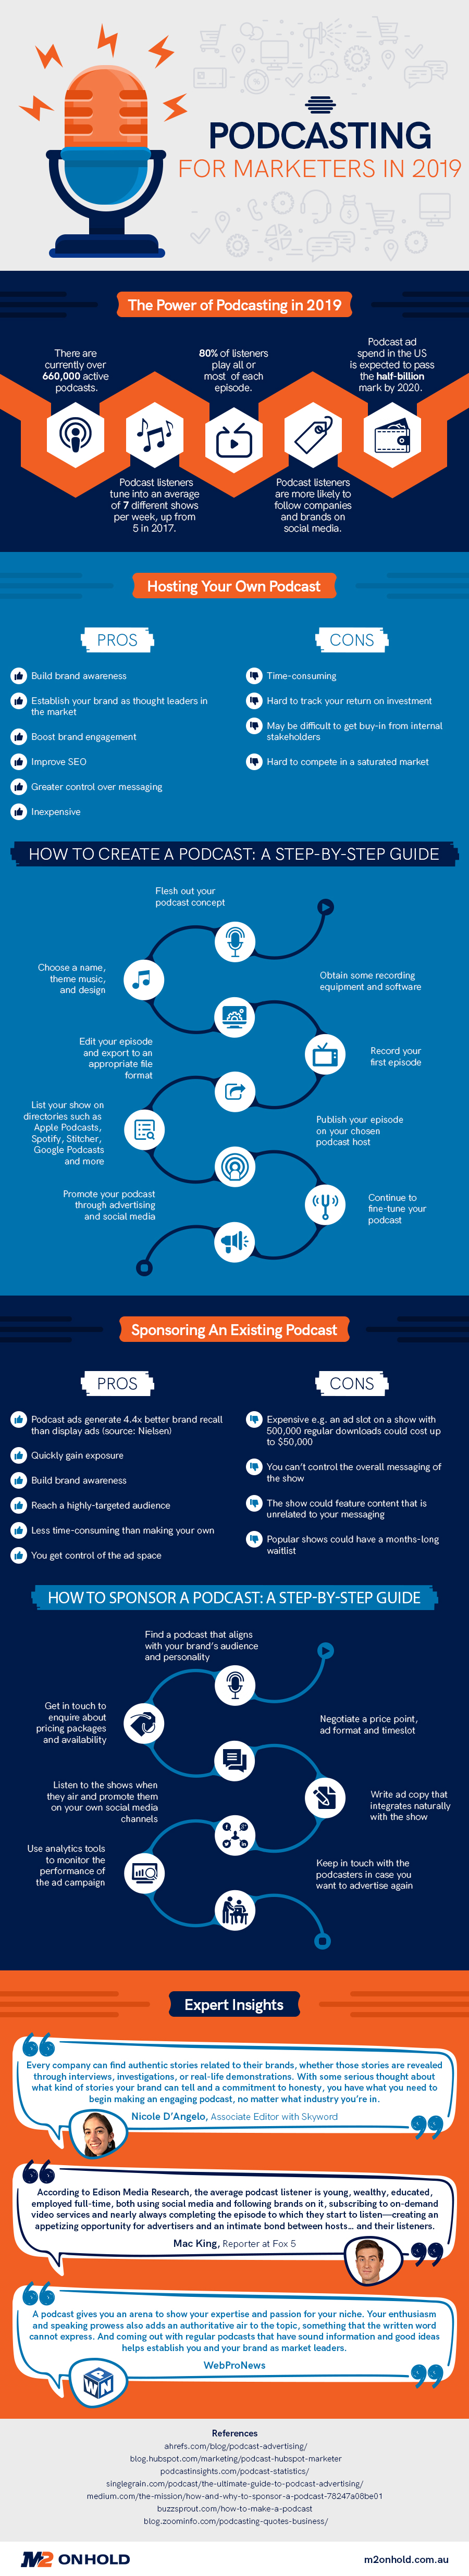 Infographic: Podcasting for Marketers in 2019